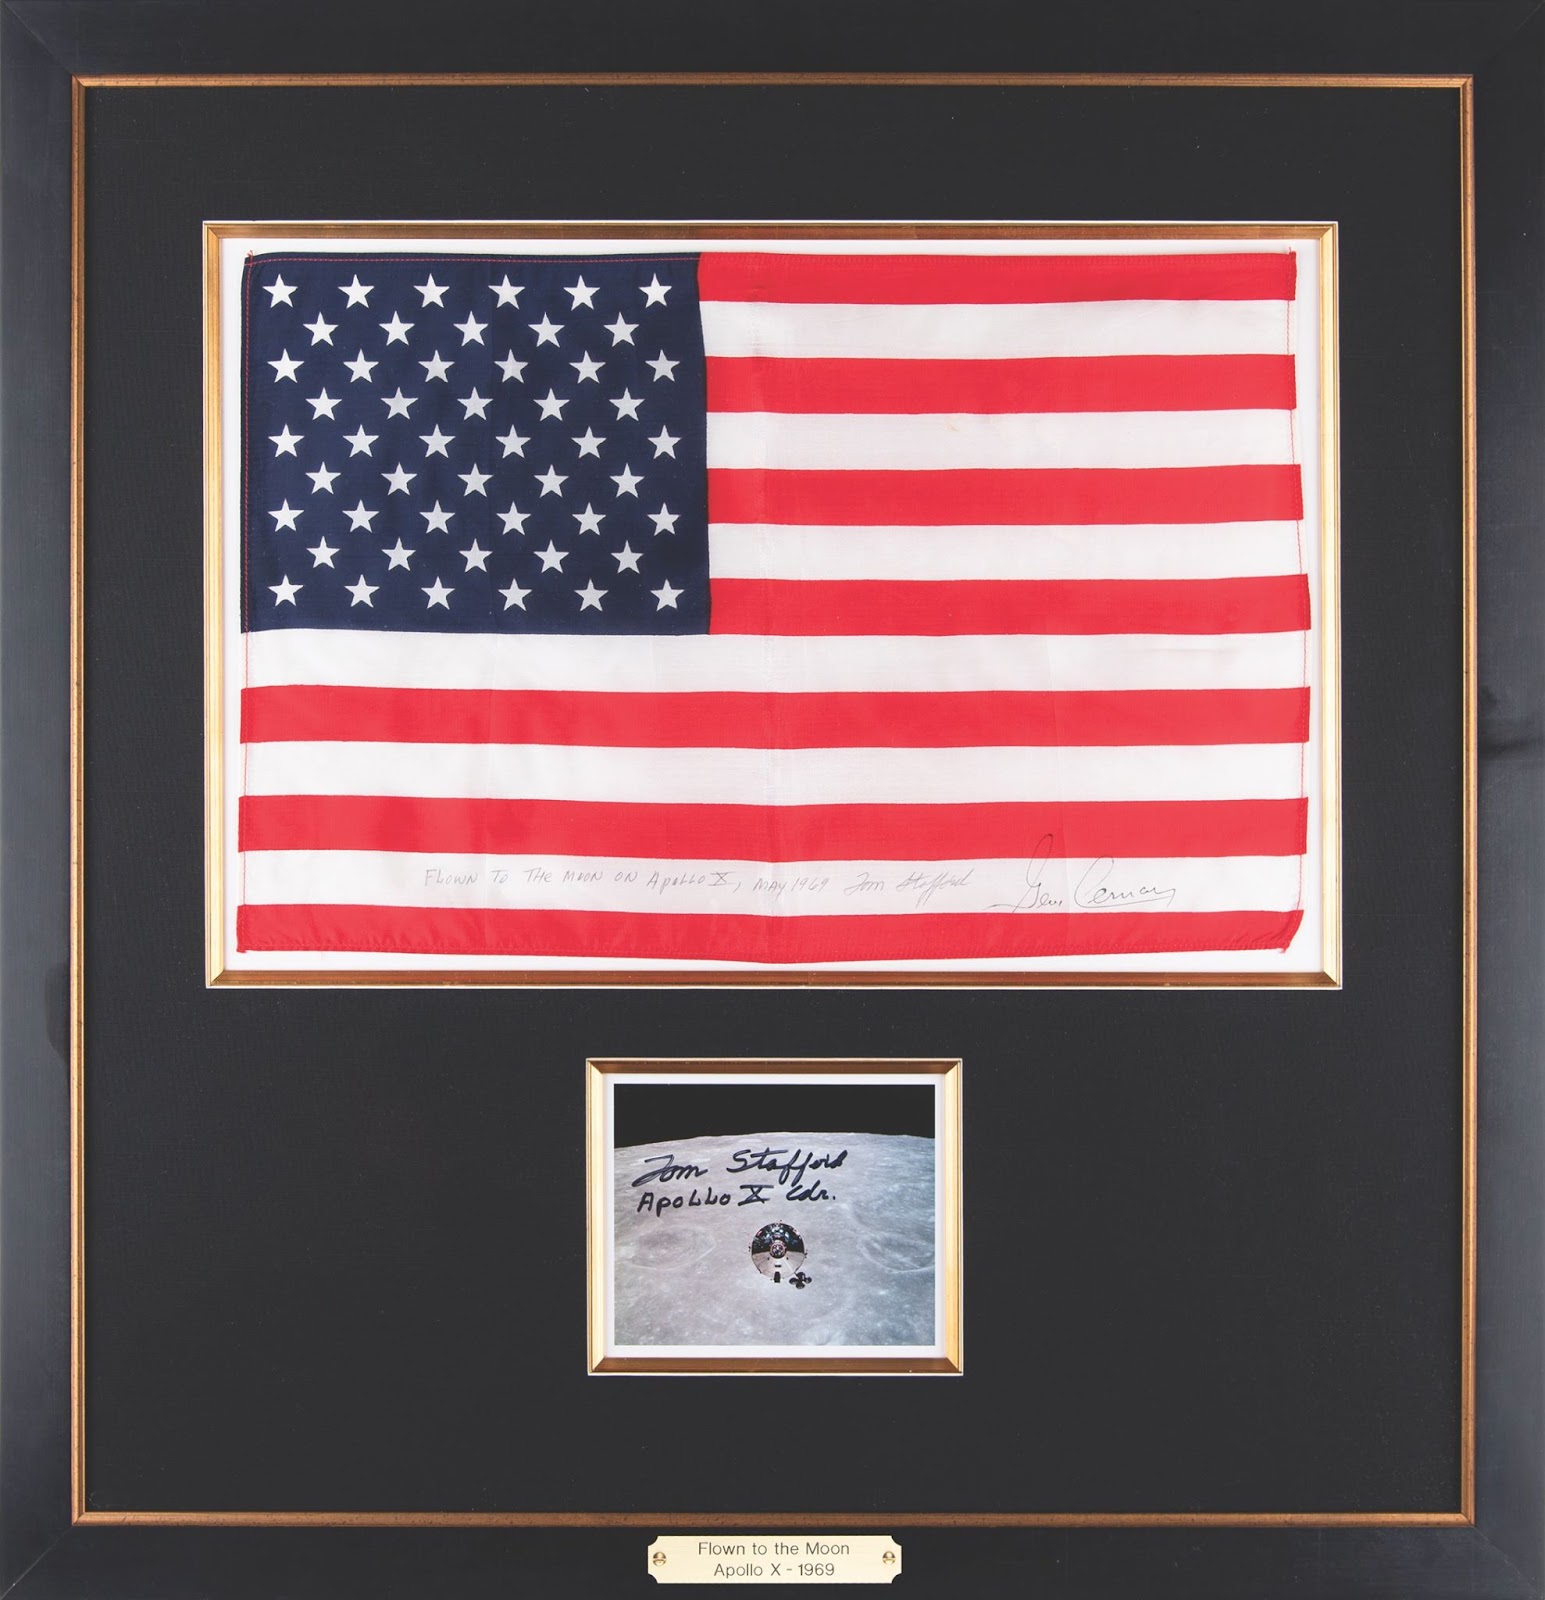 Tom Stafford’s flown American flag from the Apollo 10 mission, signed on one of the lower white stripes. The flag is framed along with a Stafford-signed photo.